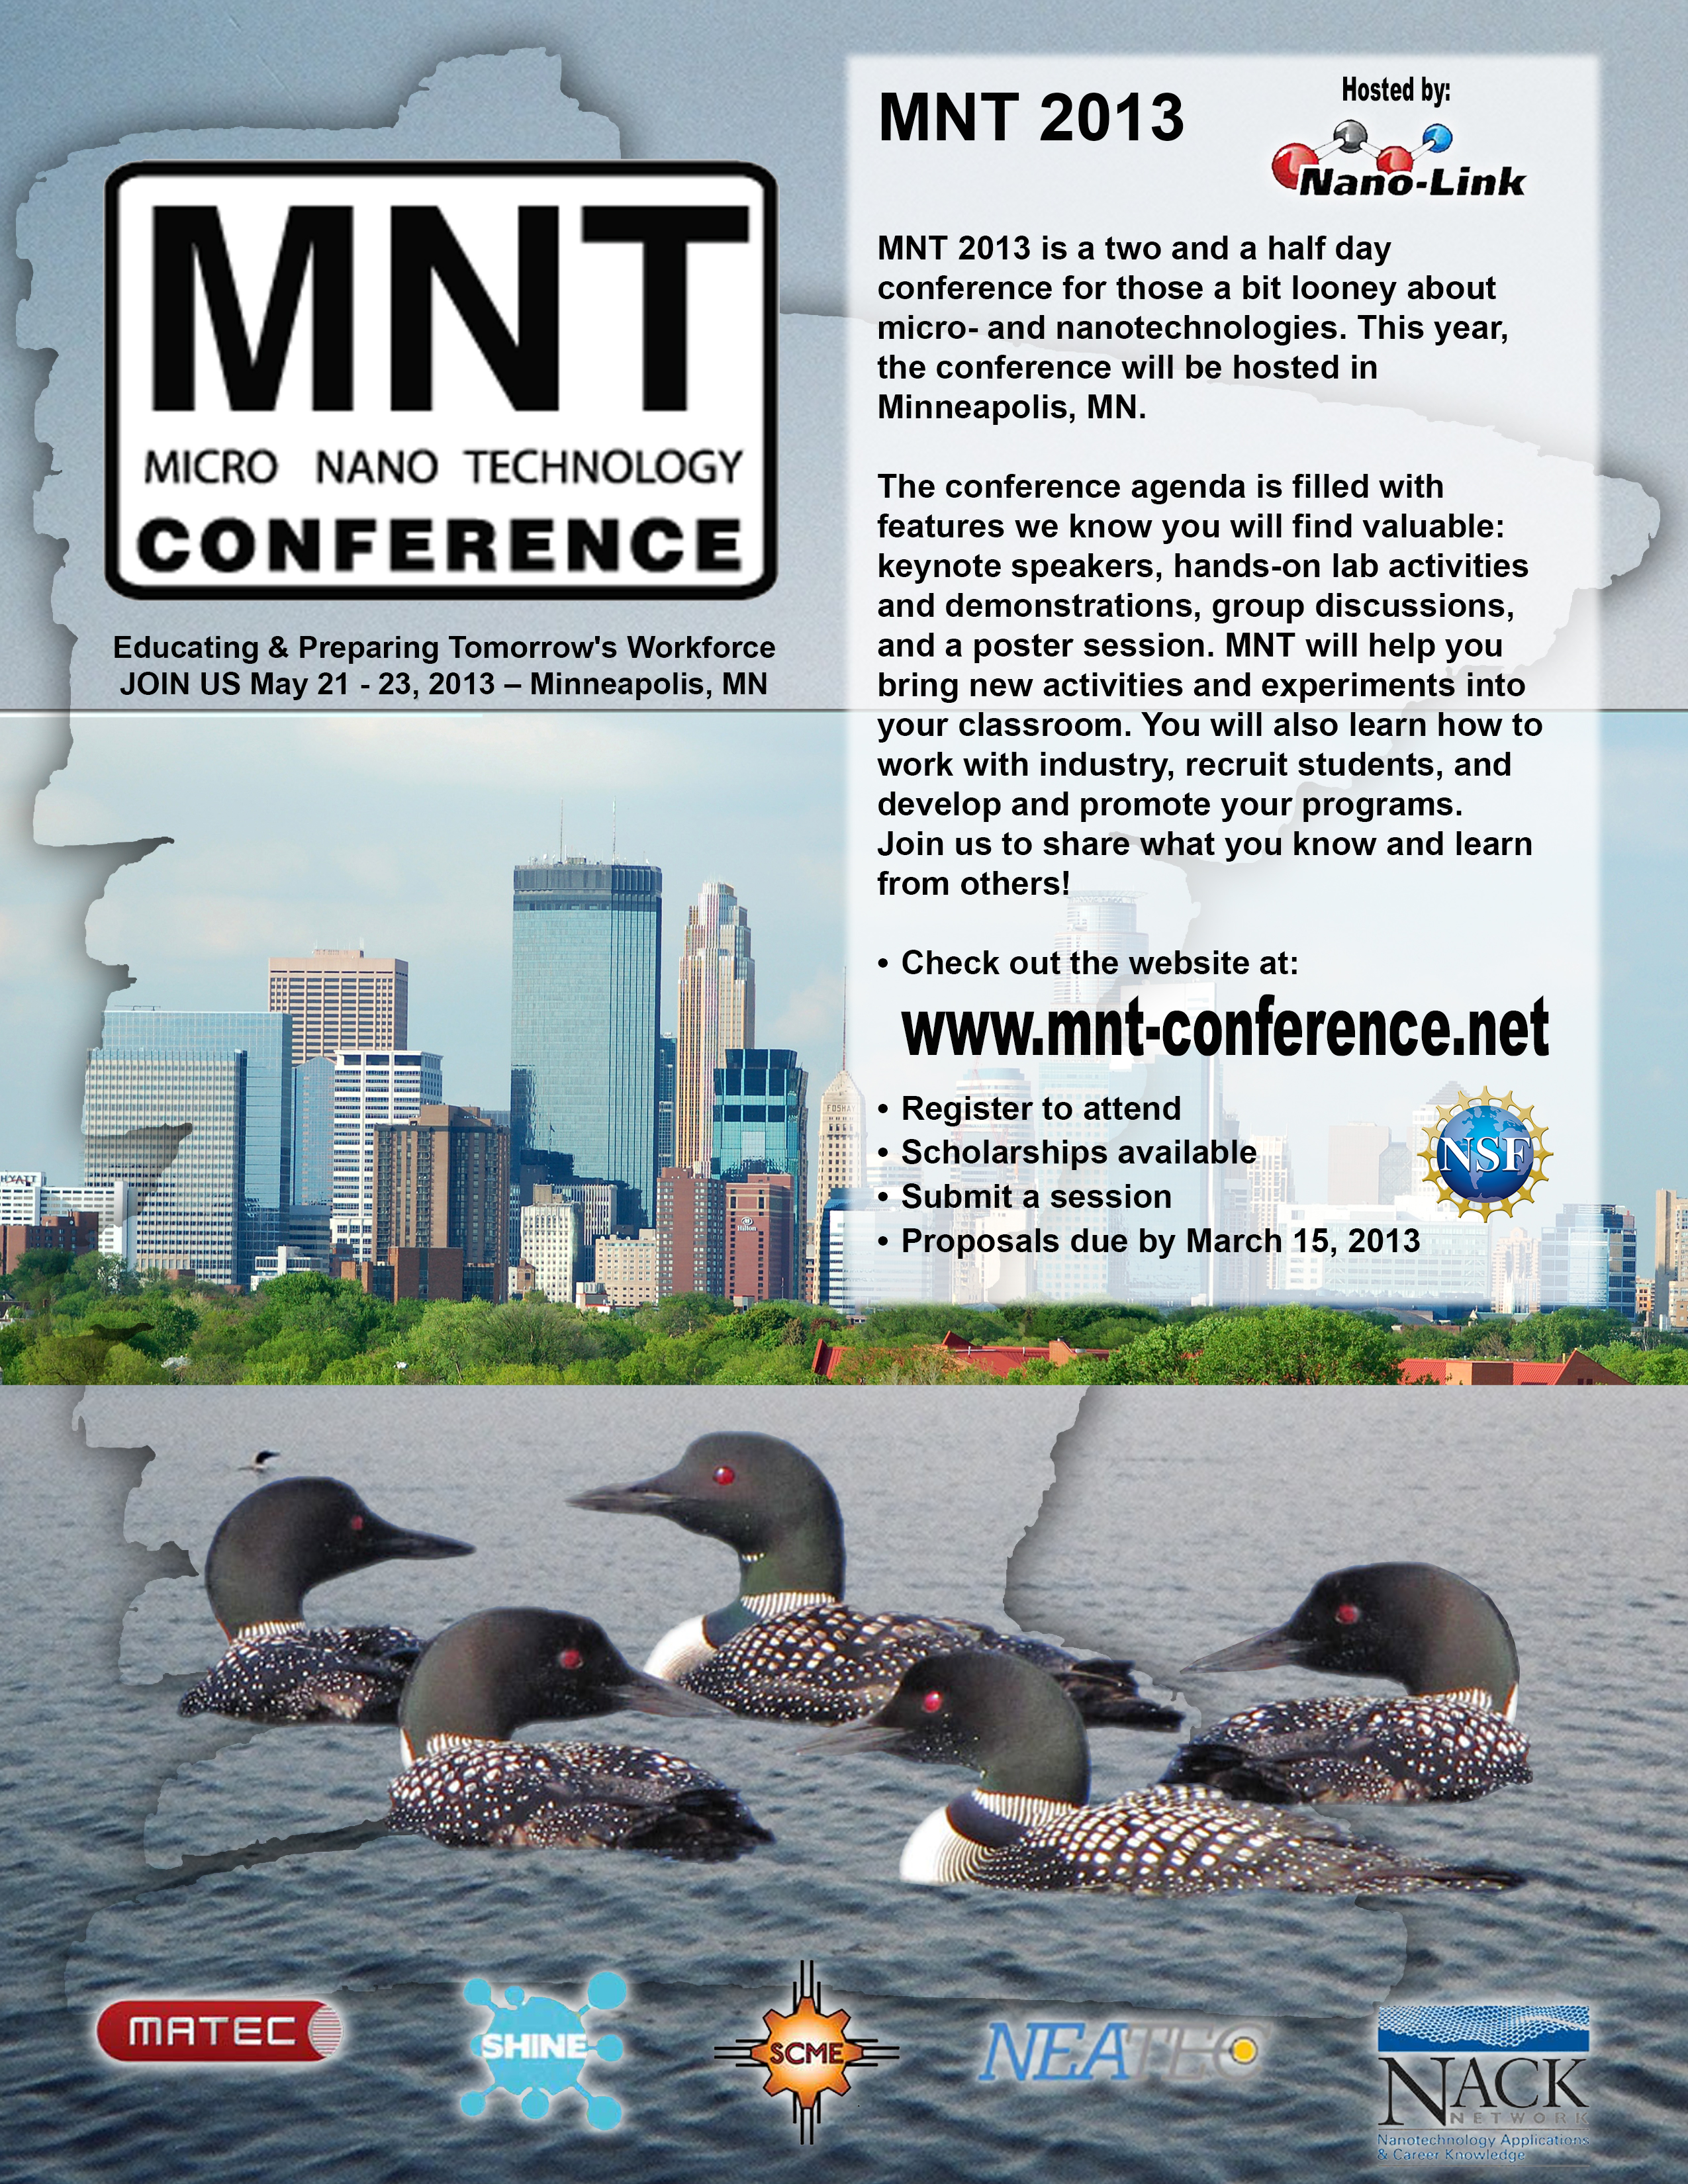 Welcome to the MNTC! — Micro/Nano Technology Center